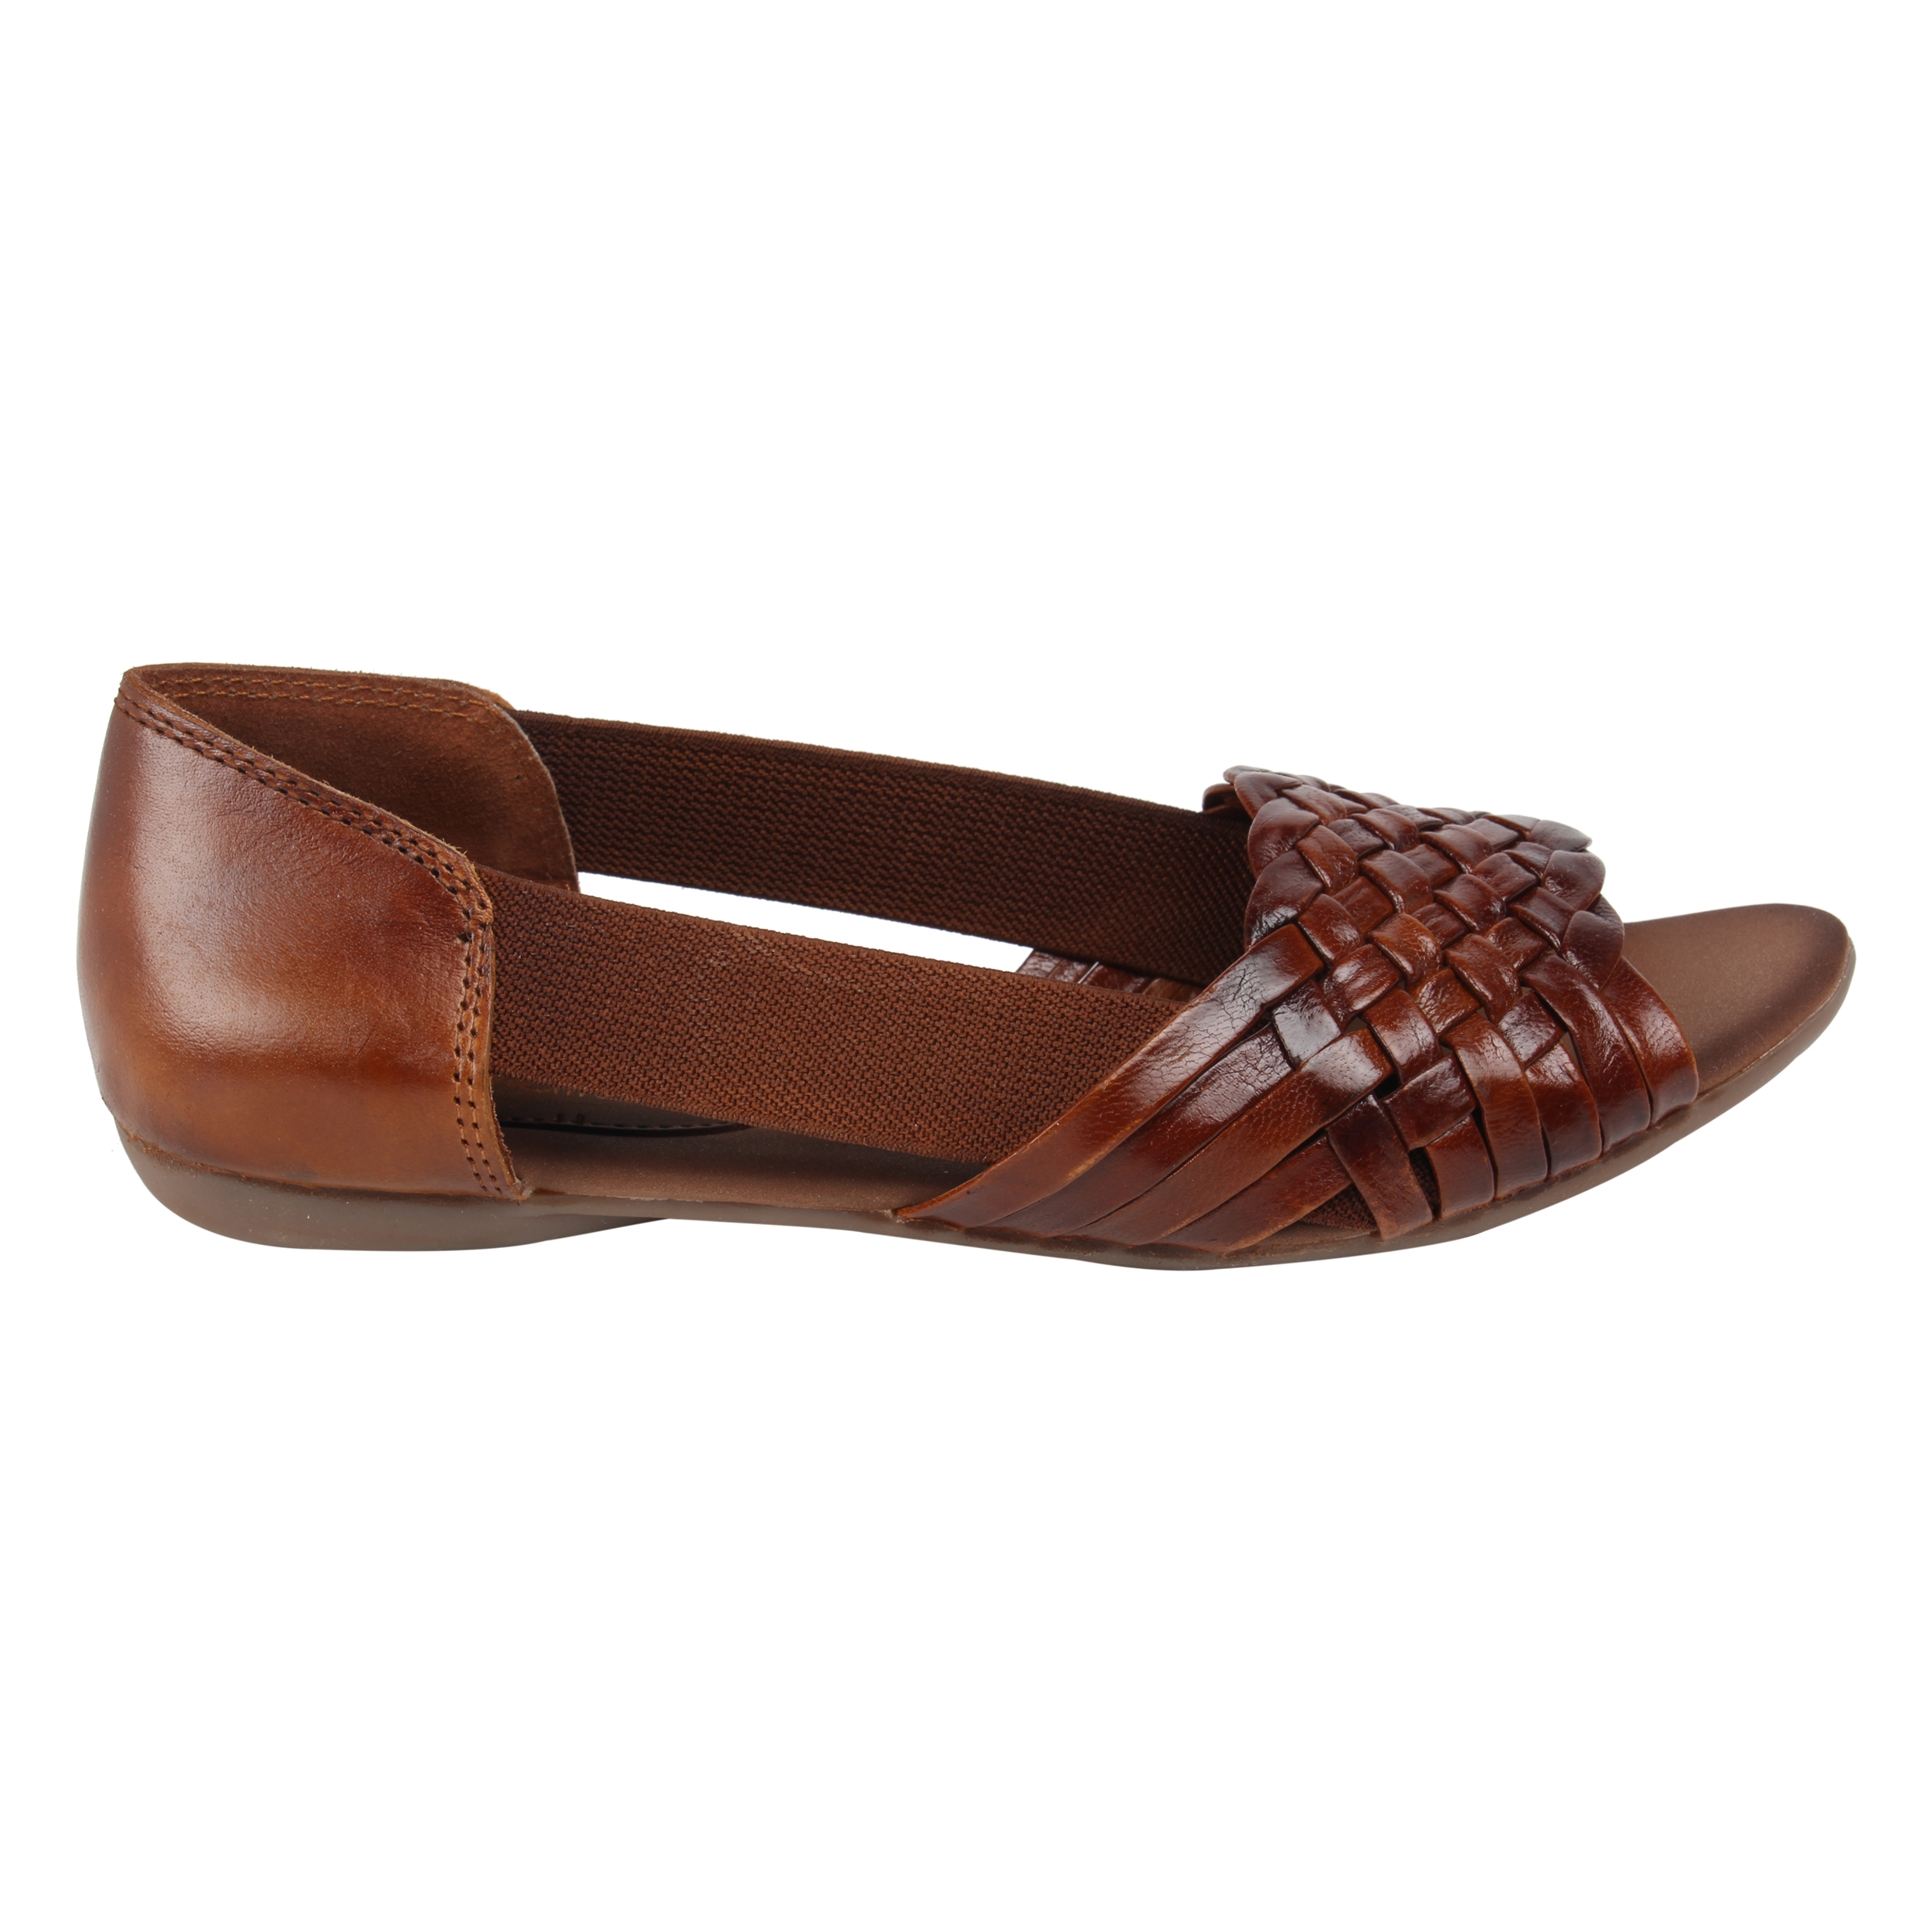 CATWALK | Pure Leather Braided Sandals